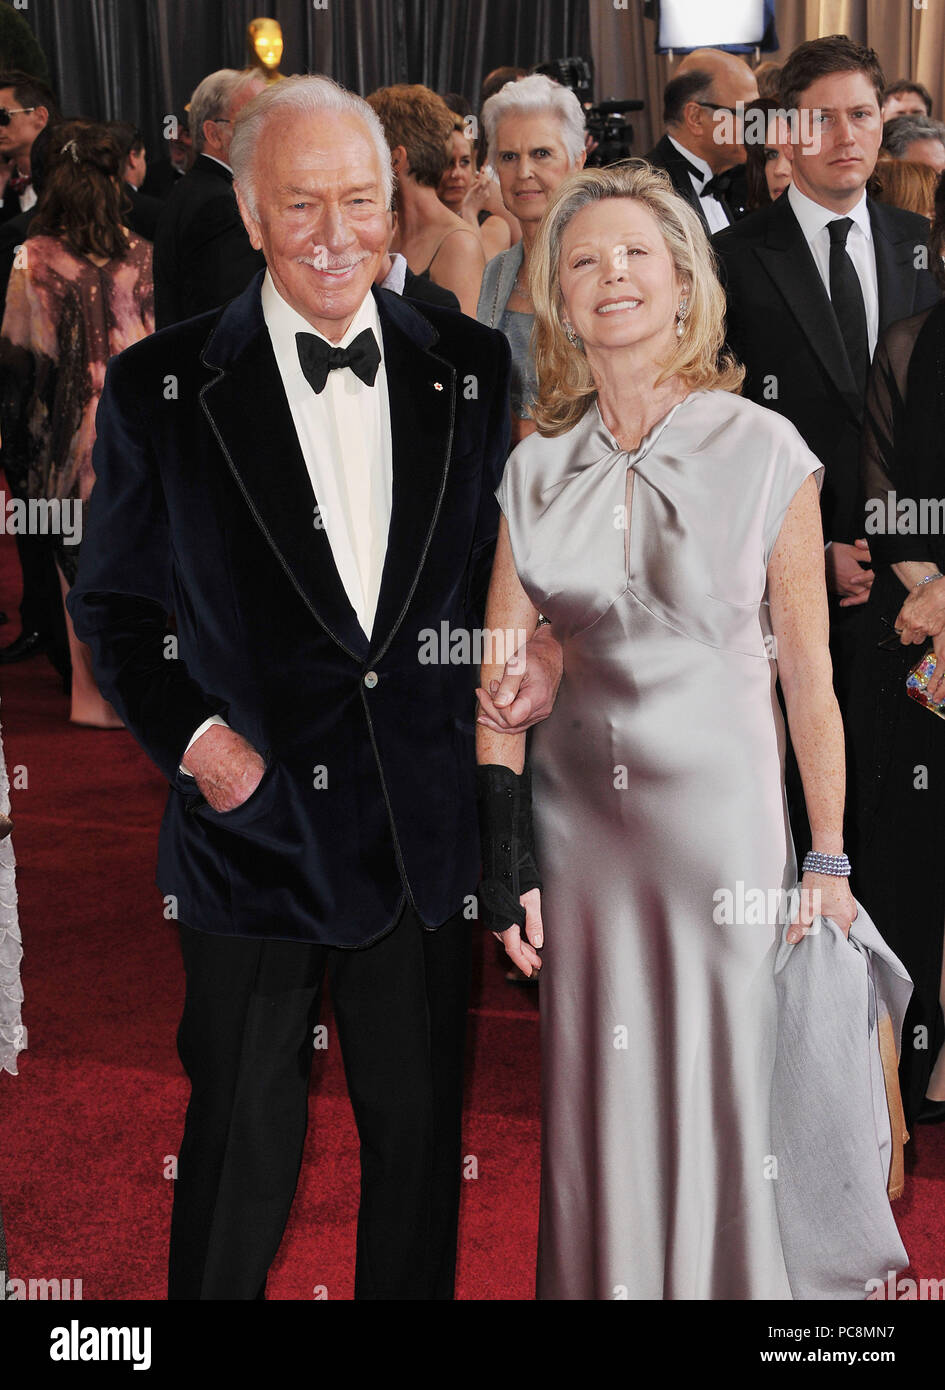 Christopher Plummer and wife  224  arriving at the Oscar - 84th Academy Awards  - 2012 at the Hollywood and Highland Theatre in Los Angeles.Christopher Plummer and wife  224 ------------- Red Carpet Event, Vertical, USA, Film Industry, Celebrities,  Photography, Bestof, Arts Culture and Entertainment, Topix Celebrities fashion /  Vertical, Best of, Event in Hollywood Life - California,  Red Carpet and backstage, USA, Film Industry, Celebrities,  movie celebrities, TV celebrities, Music celebrities, Photography, Bestof, Arts Culture and Entertainment,  Topix, vertical,  family from from the yea Stock Photo